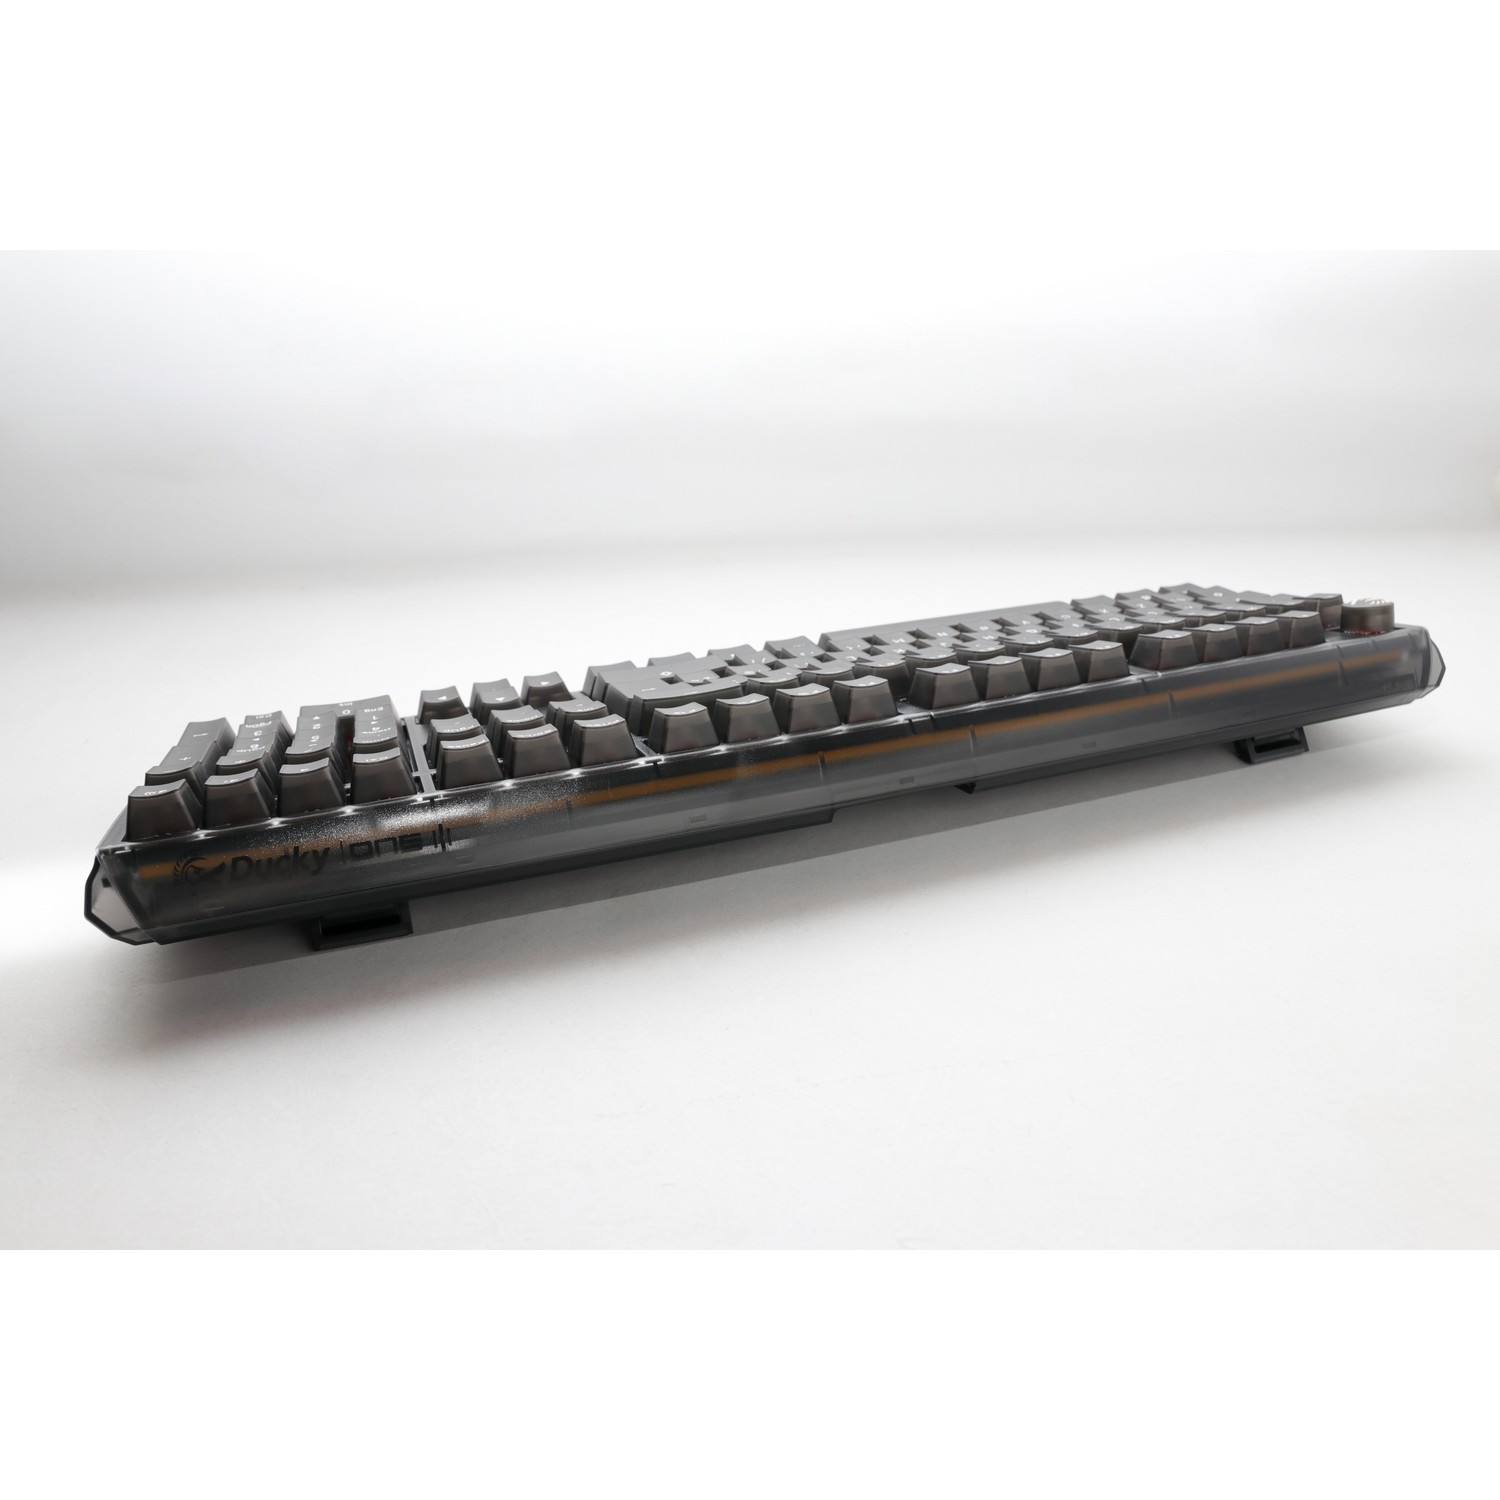 Ducky - Ducky One 3 Aura Mechanical Gaming Keyboard Black Cherry Brown Switch UK Layout